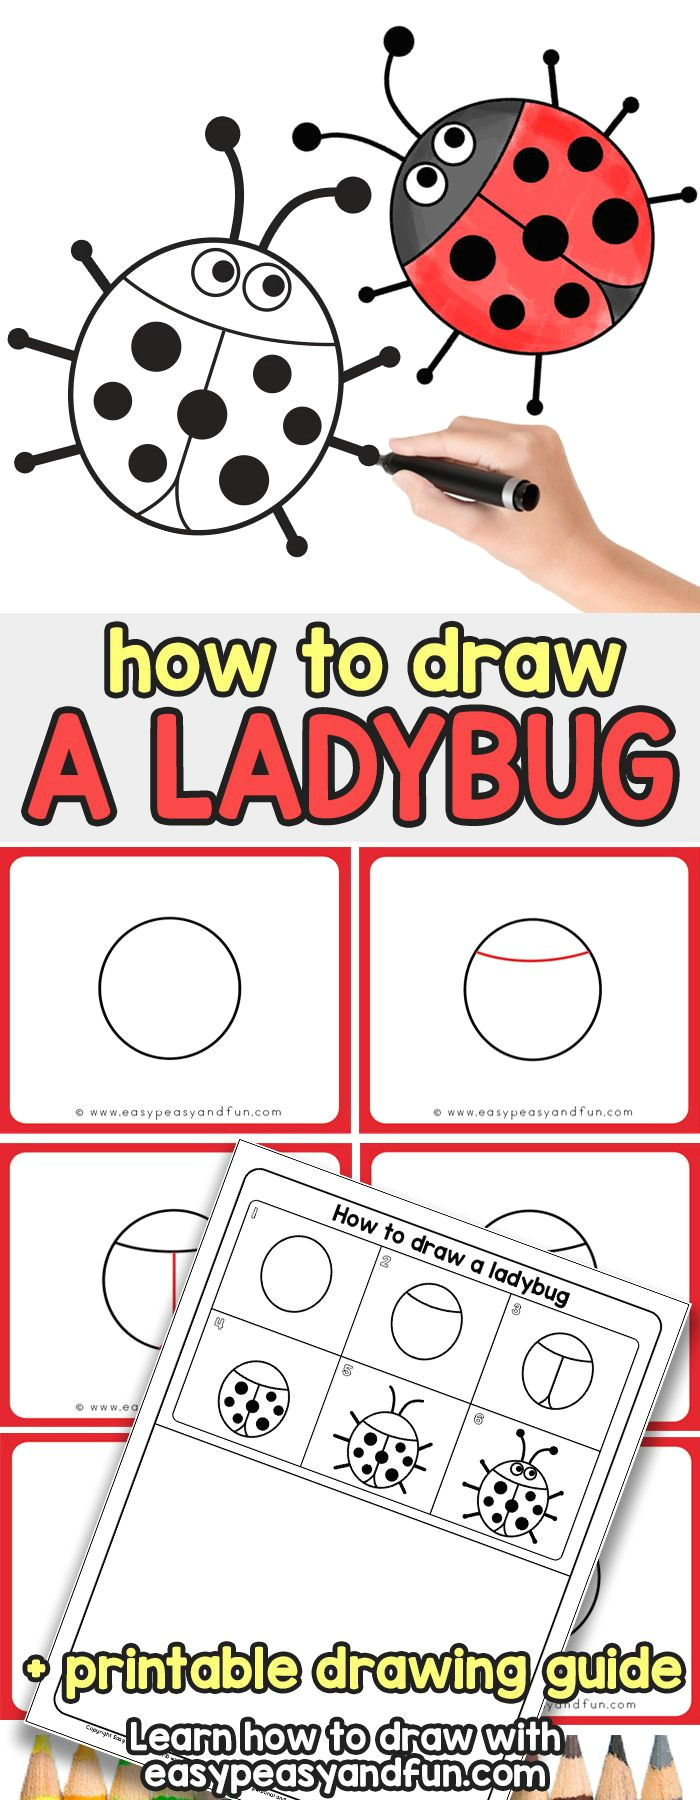 Easy Drawings Ladybug How to Draw A Ladybug Easy Peasy and Fun Pinterest Drawings